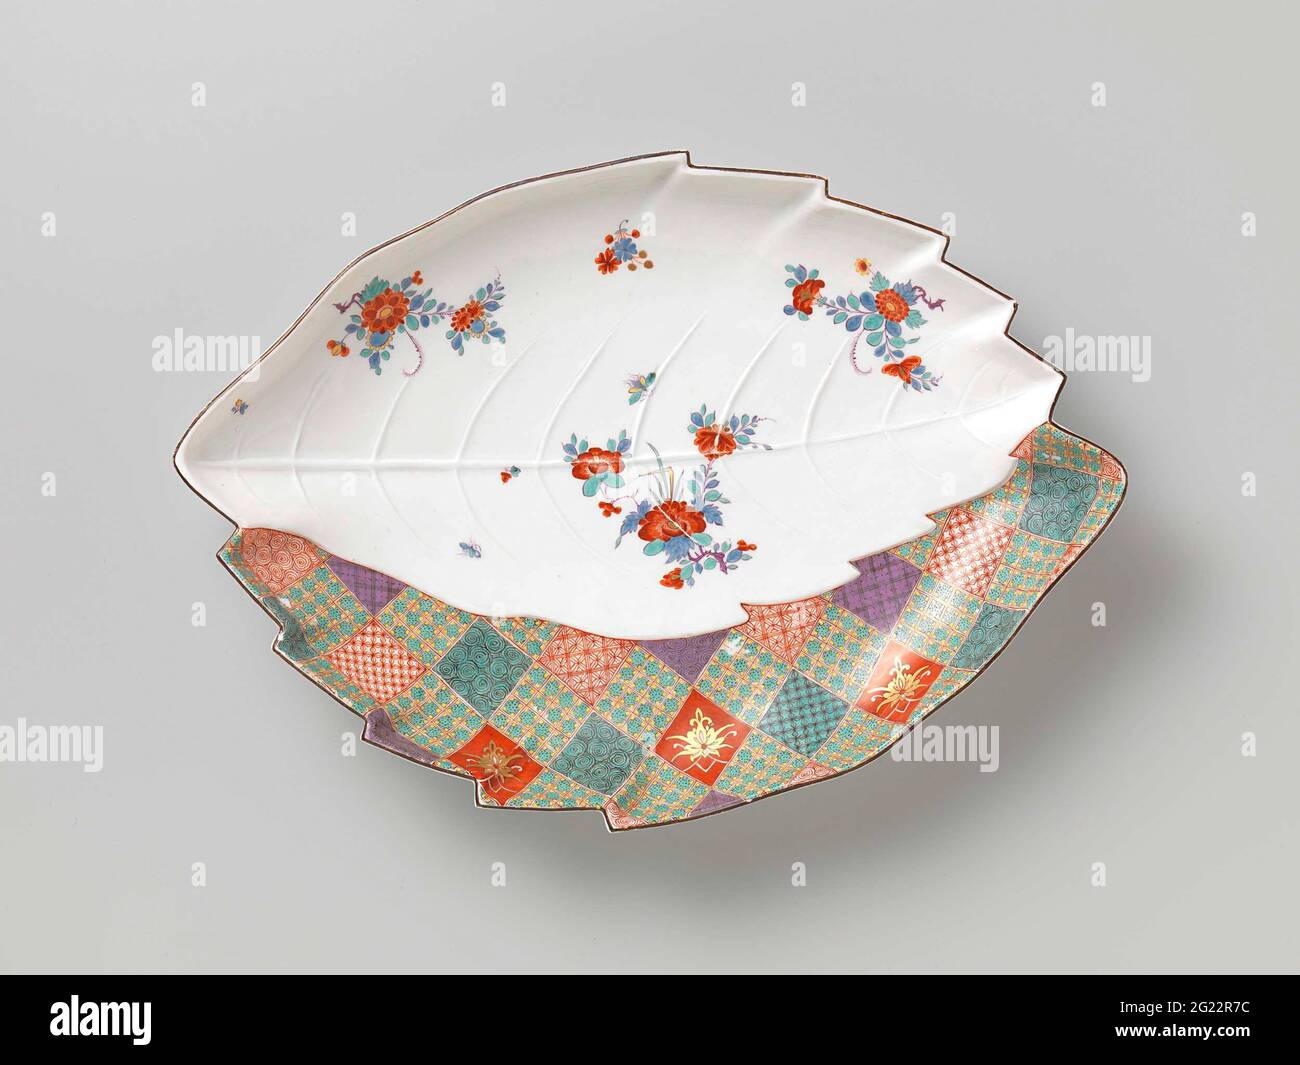 Dish, painted multi-colored with a hop of cake and an Imii decor. Dish of painted porcelain. The dish has the shape of two partially covering leaves. The edge is partly serrated. One leaf has a large grain with being ververrings and is painted with flower branches. The other half-covered leaf is painted with a pressure Imari textile pattern of windows. The dish has been marked. Stock Photo